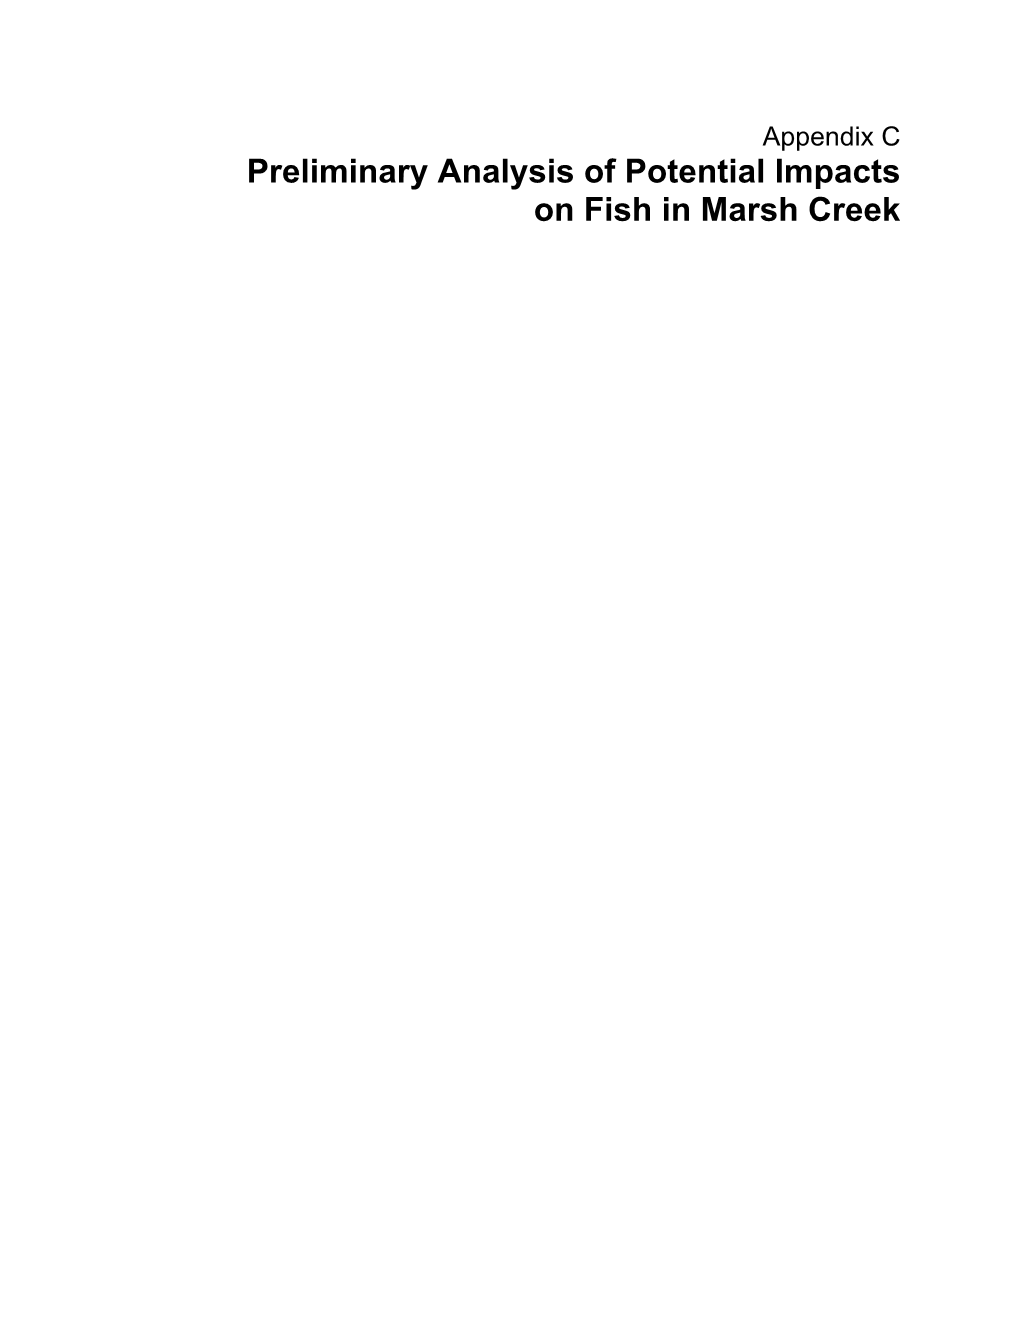 Preliminary Analysis of Potential Impacts on Fish in Marsh Creek